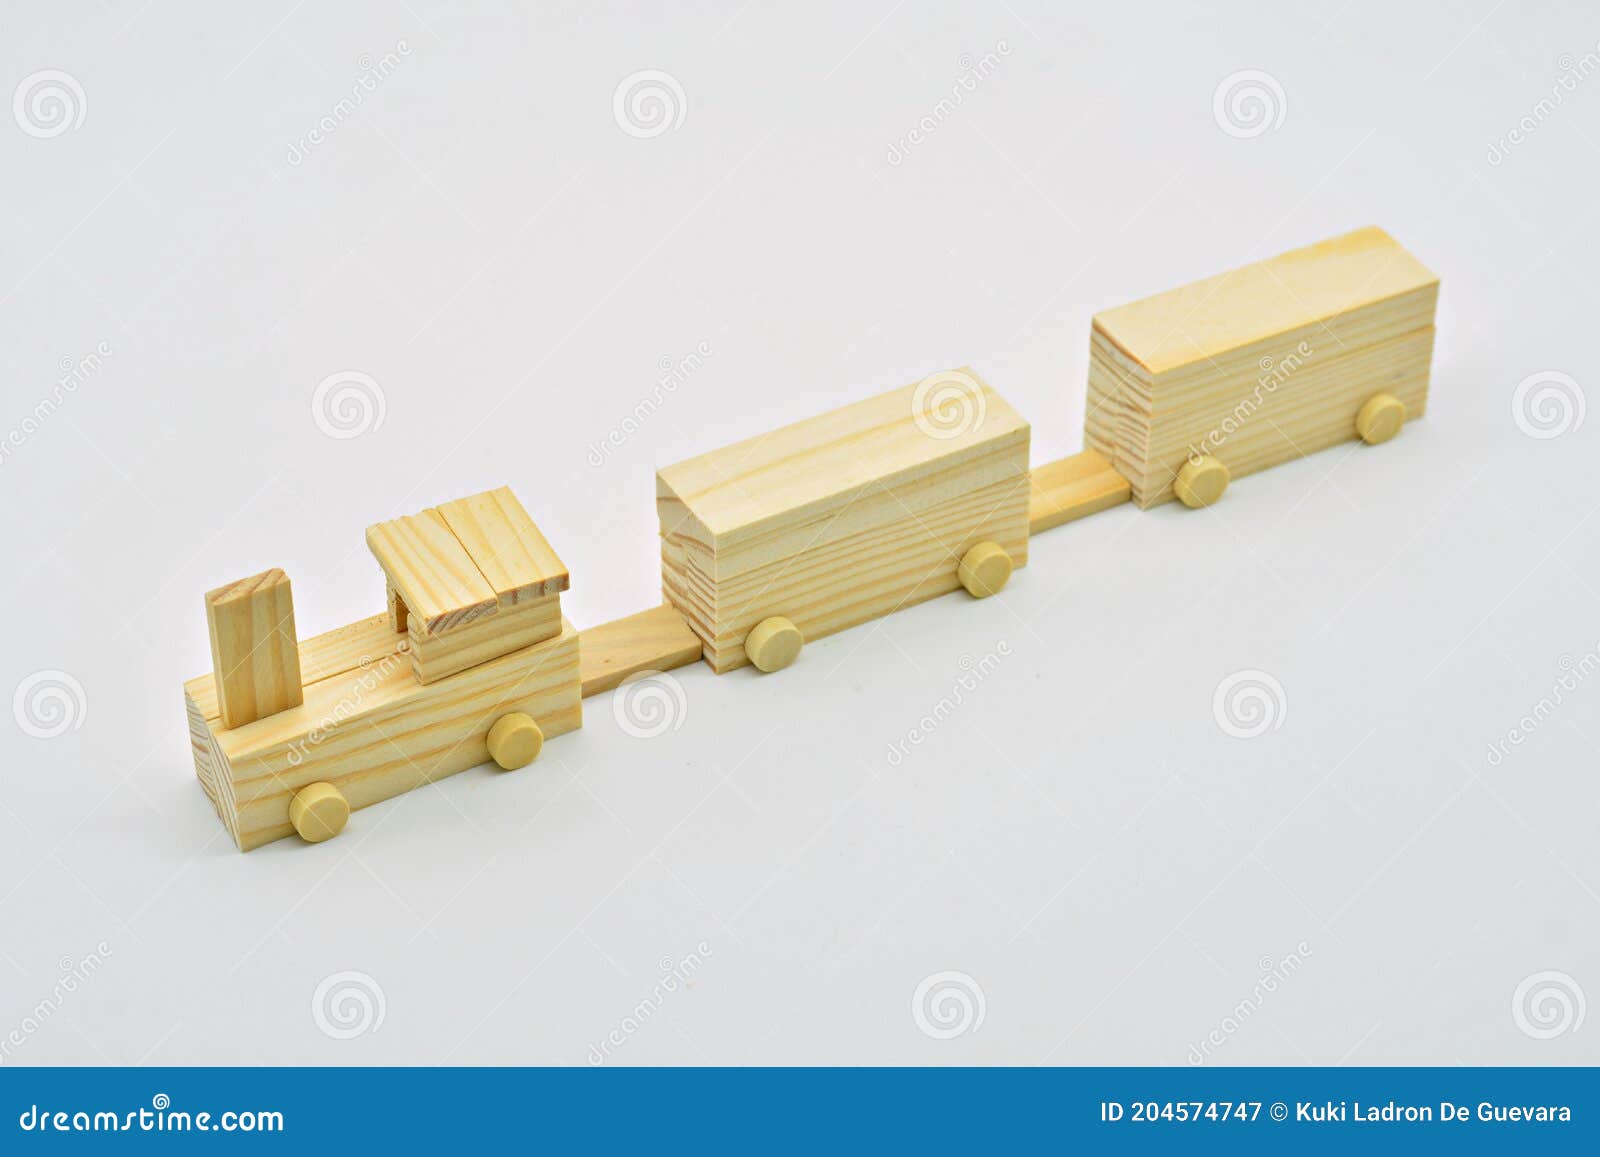 train made with wooden blocks